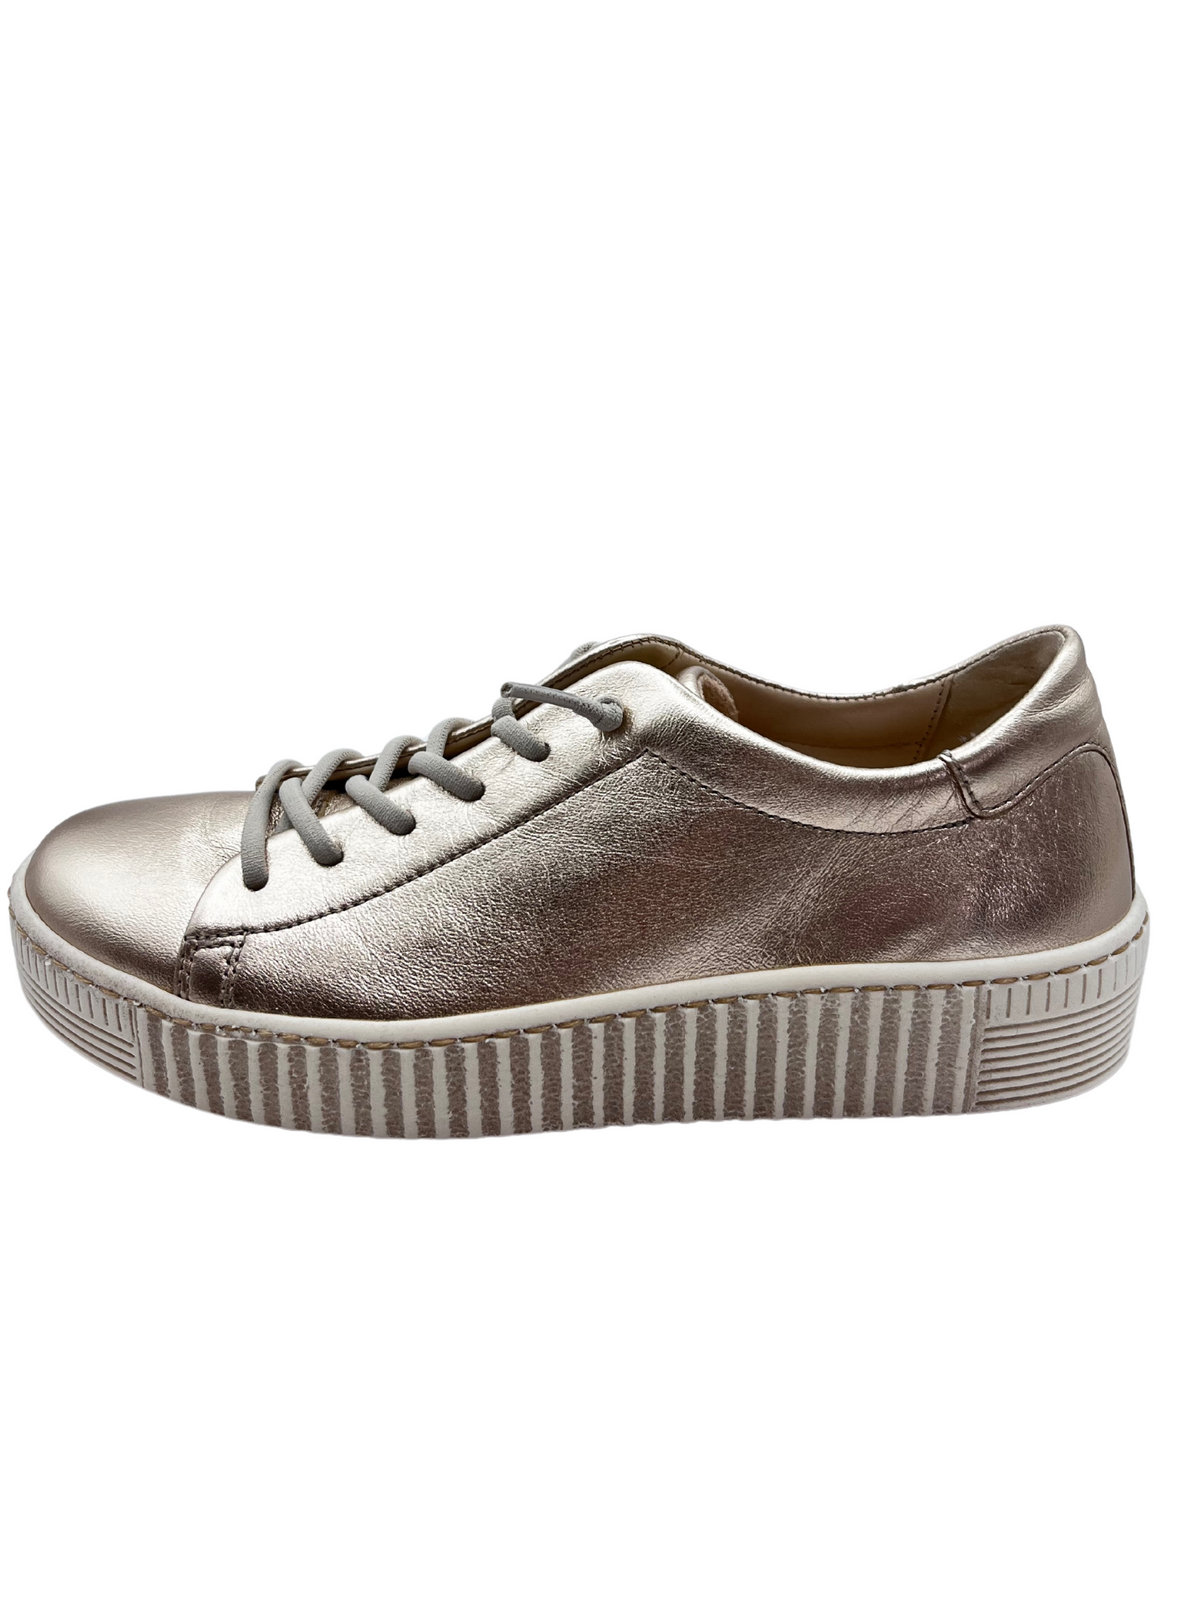 Gabor Gold Leather Trainers with Elastic Laces